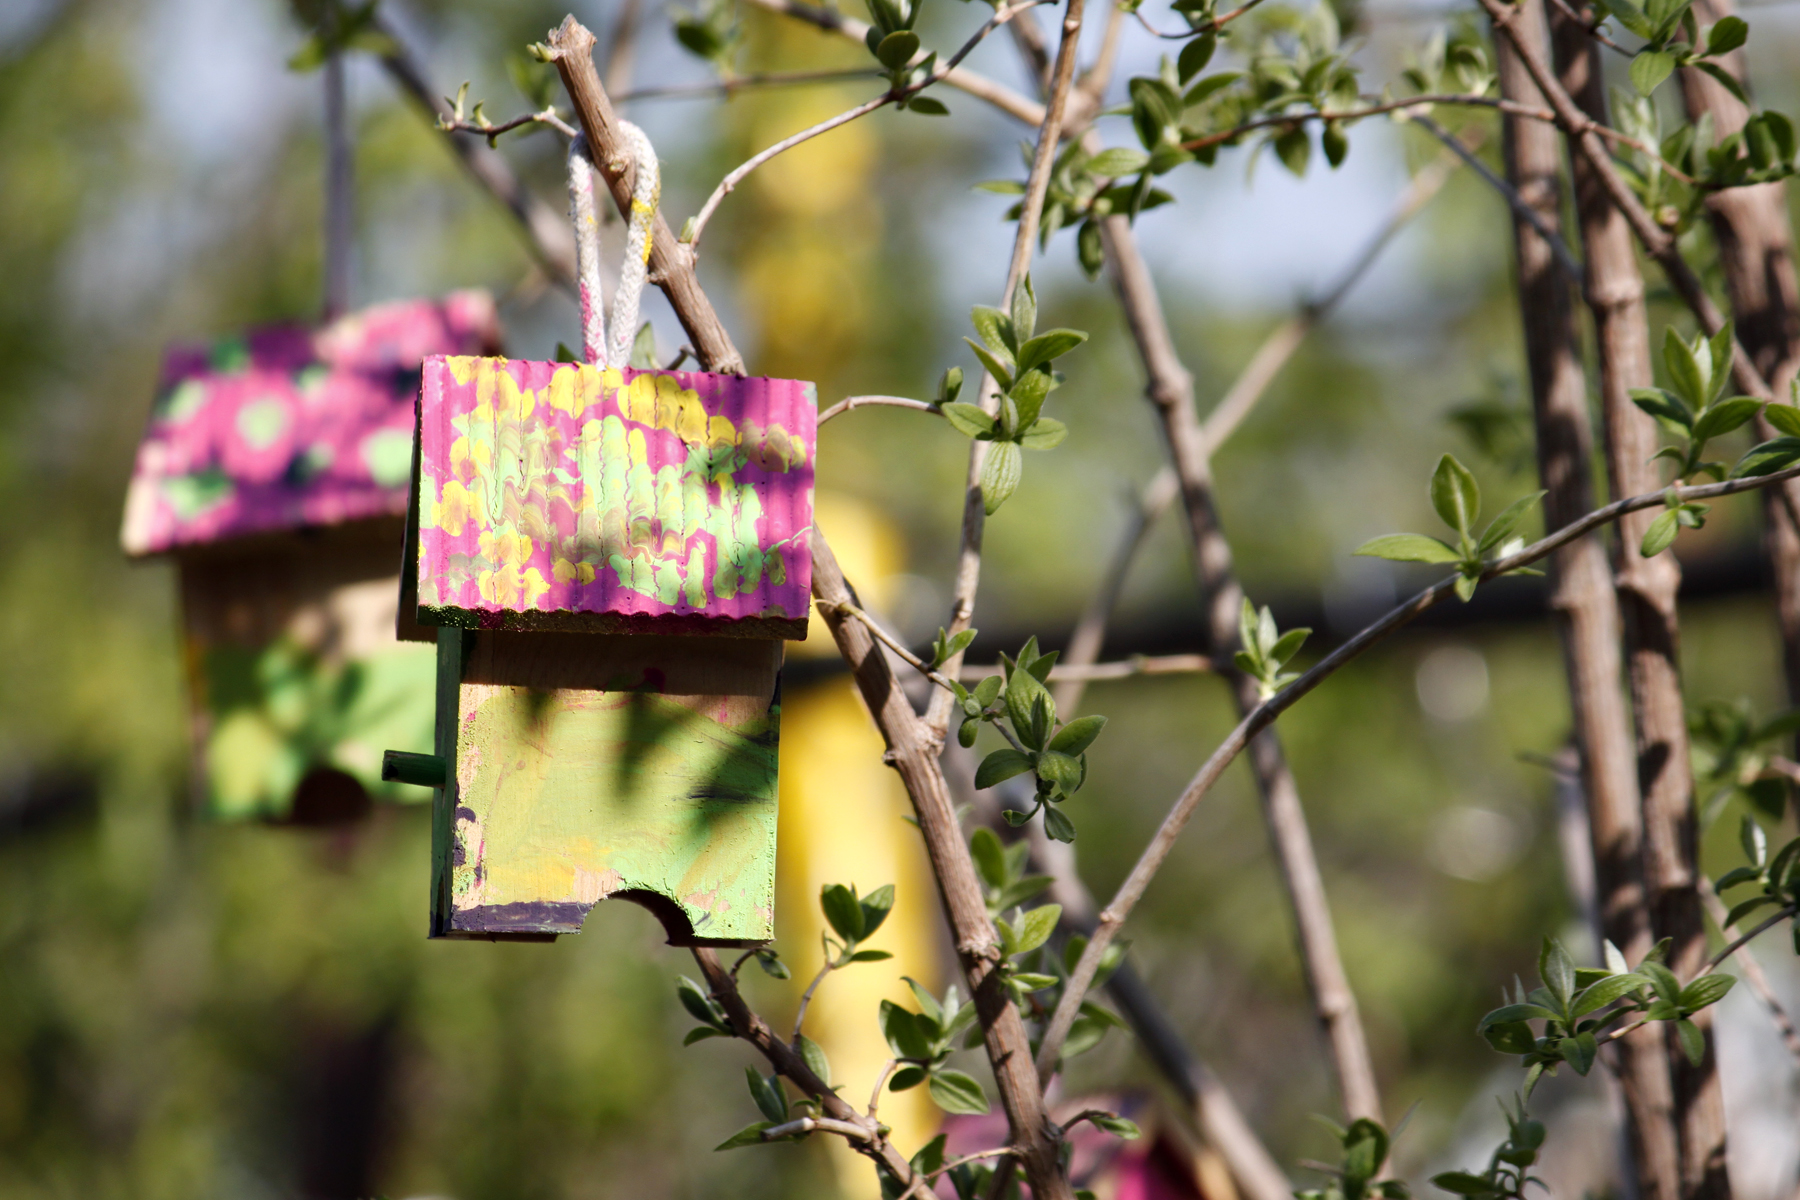 Colourful homemade birdhouses in a tree